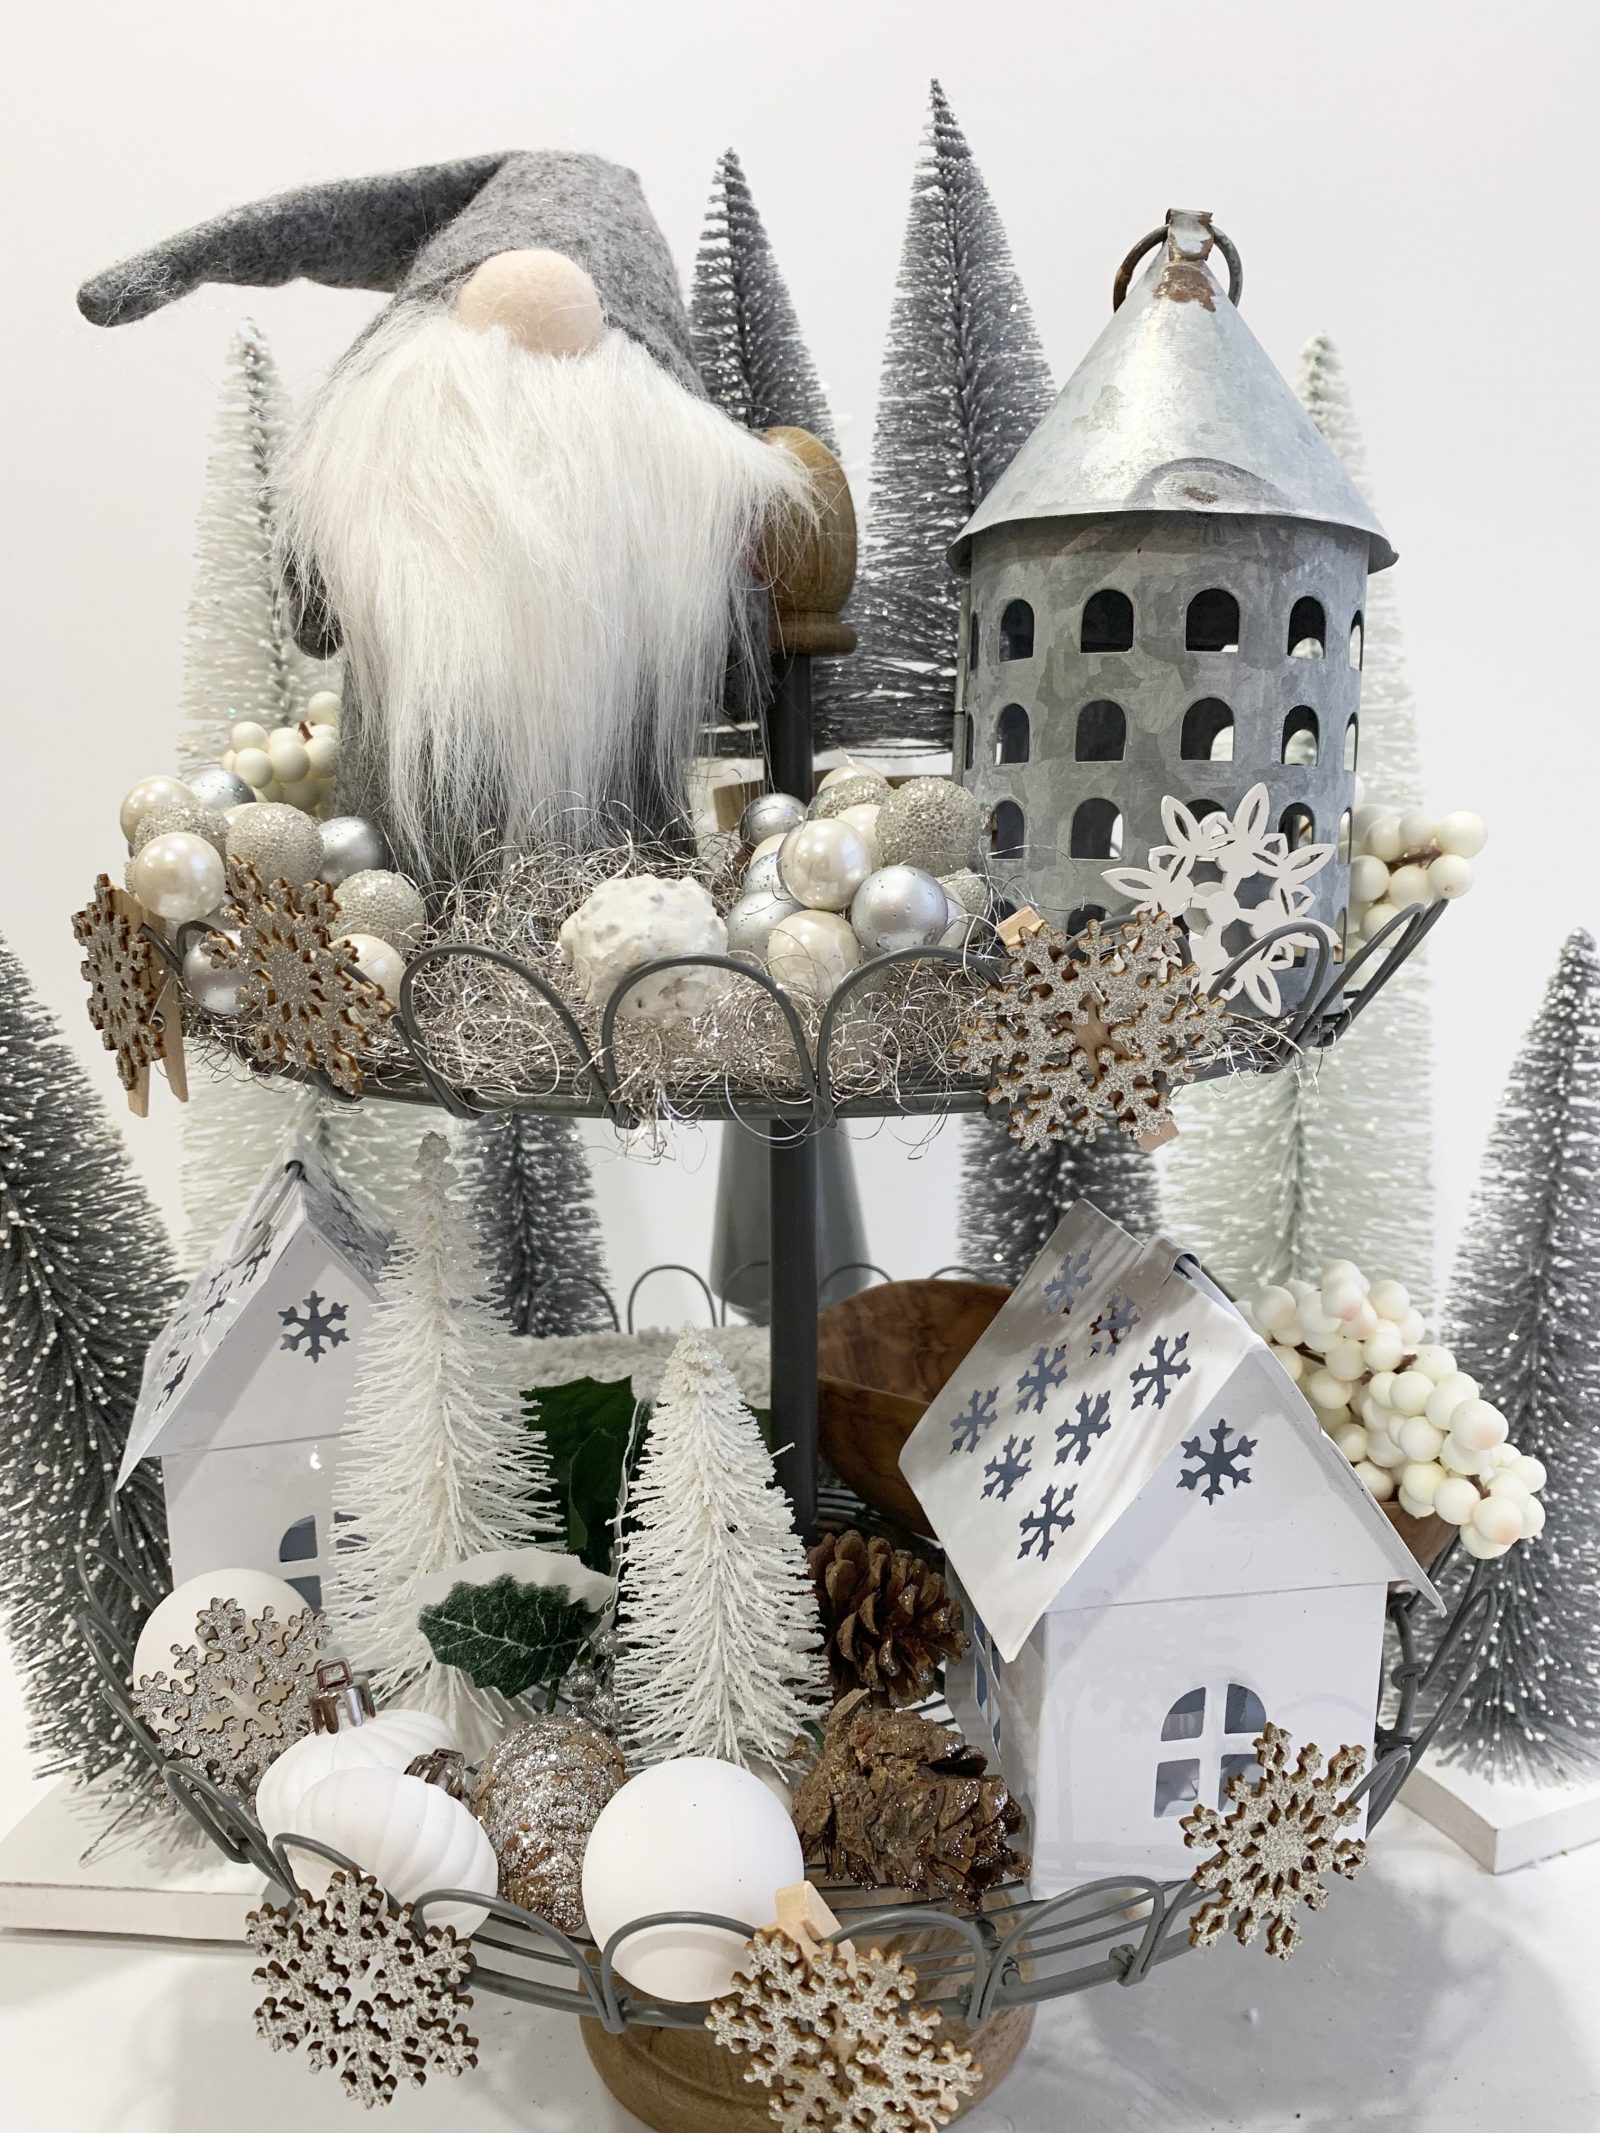 How to Style Your Tiered Stand for Christmas Tomte Standing Watch Over Families and Farmland #Farmhouse #Affordable #BudgetFriendly #Christmas #DIY #ChristmasDecor #FarmhouseDecor